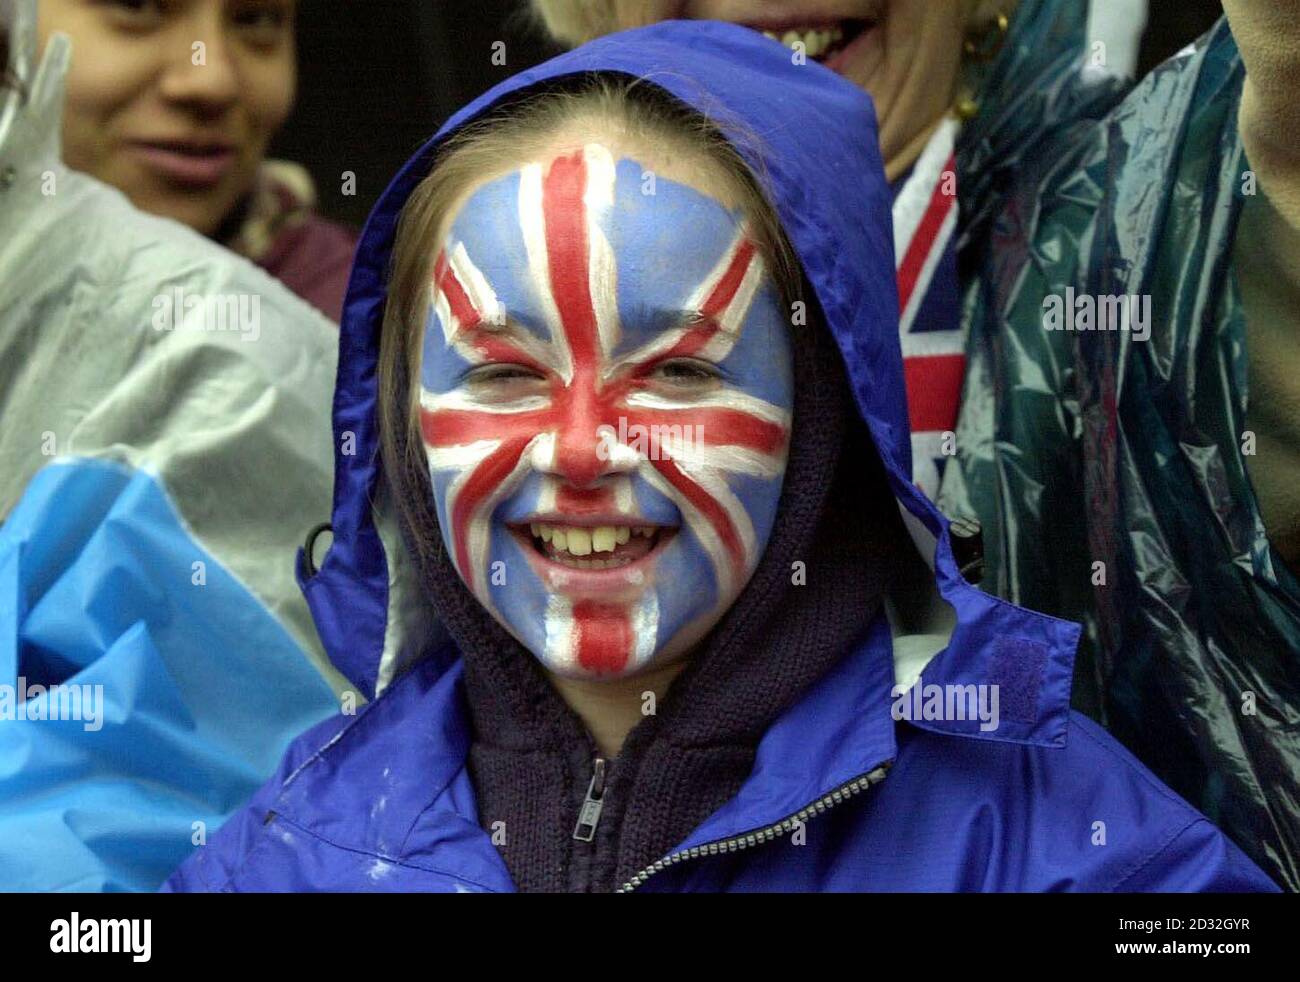 A young spectator with the Union Jack painted on her face waits with early morning spectators to see Britain's Queen Elizabeth II outside Buckingham Palace.   * The Queen and the Duke of Edinburgh will leave Buckingham Palace in a State Gold Coach for a thanksgiving service at St Paul's Cathedral, before returning to watch a parade in The Mall on the final day of the Golden Jubilee. Stock Photo